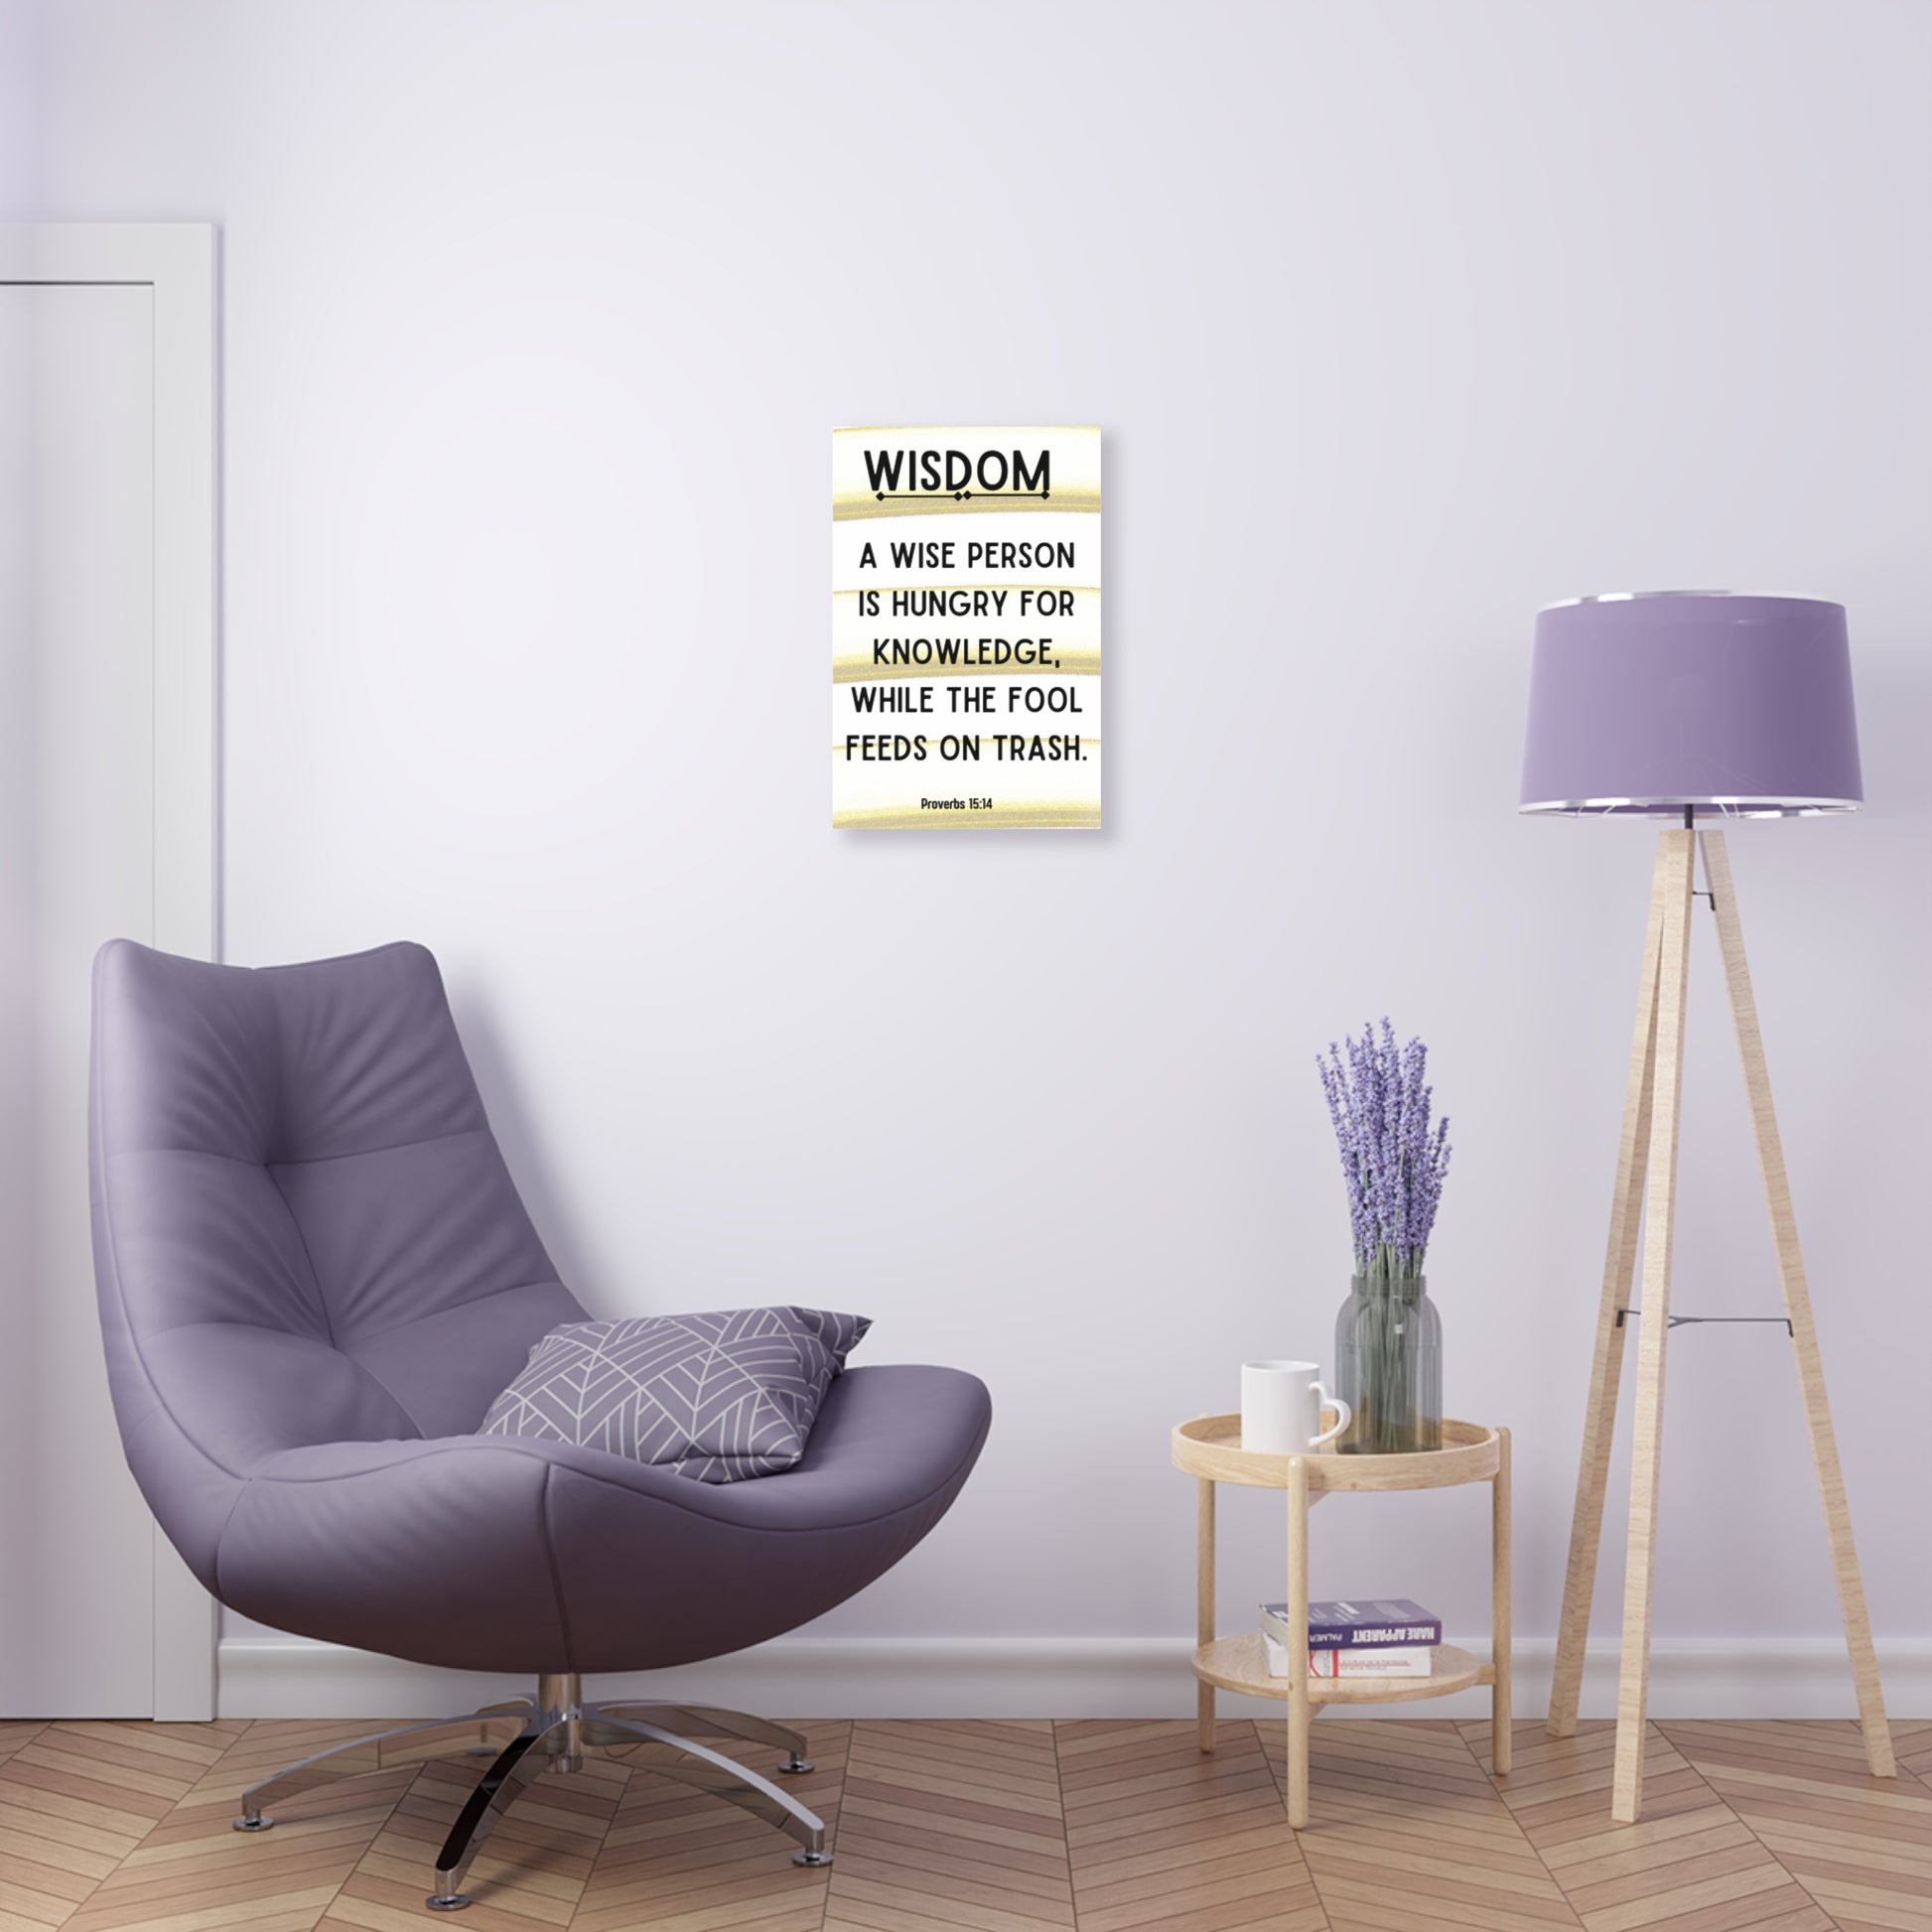 Wall Hanging Decor - Acrylic Print with Inspirational Scripture | Art & Wall Decor,Assembled in the USA,Assembled in USA,Decor,Home & Living,Home Decor,Indoor,Made in the USA,Made in USA,Poster